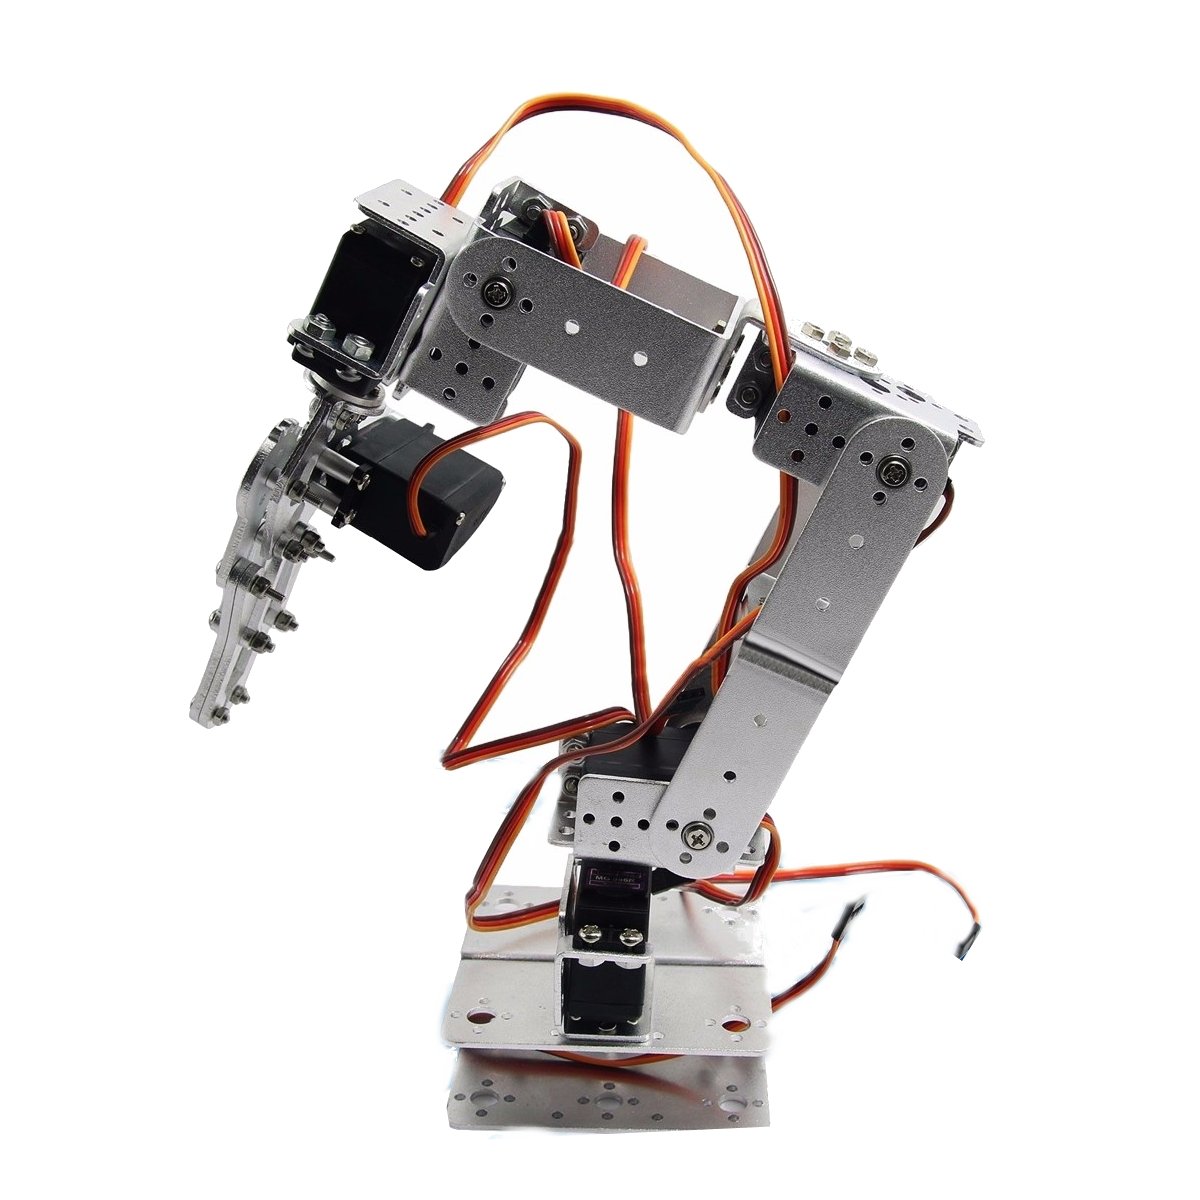 ROT2U 6DOF Aluminium Robot Arm Clamp Claw Mount Kit With Servos For Arduino-Silver 2